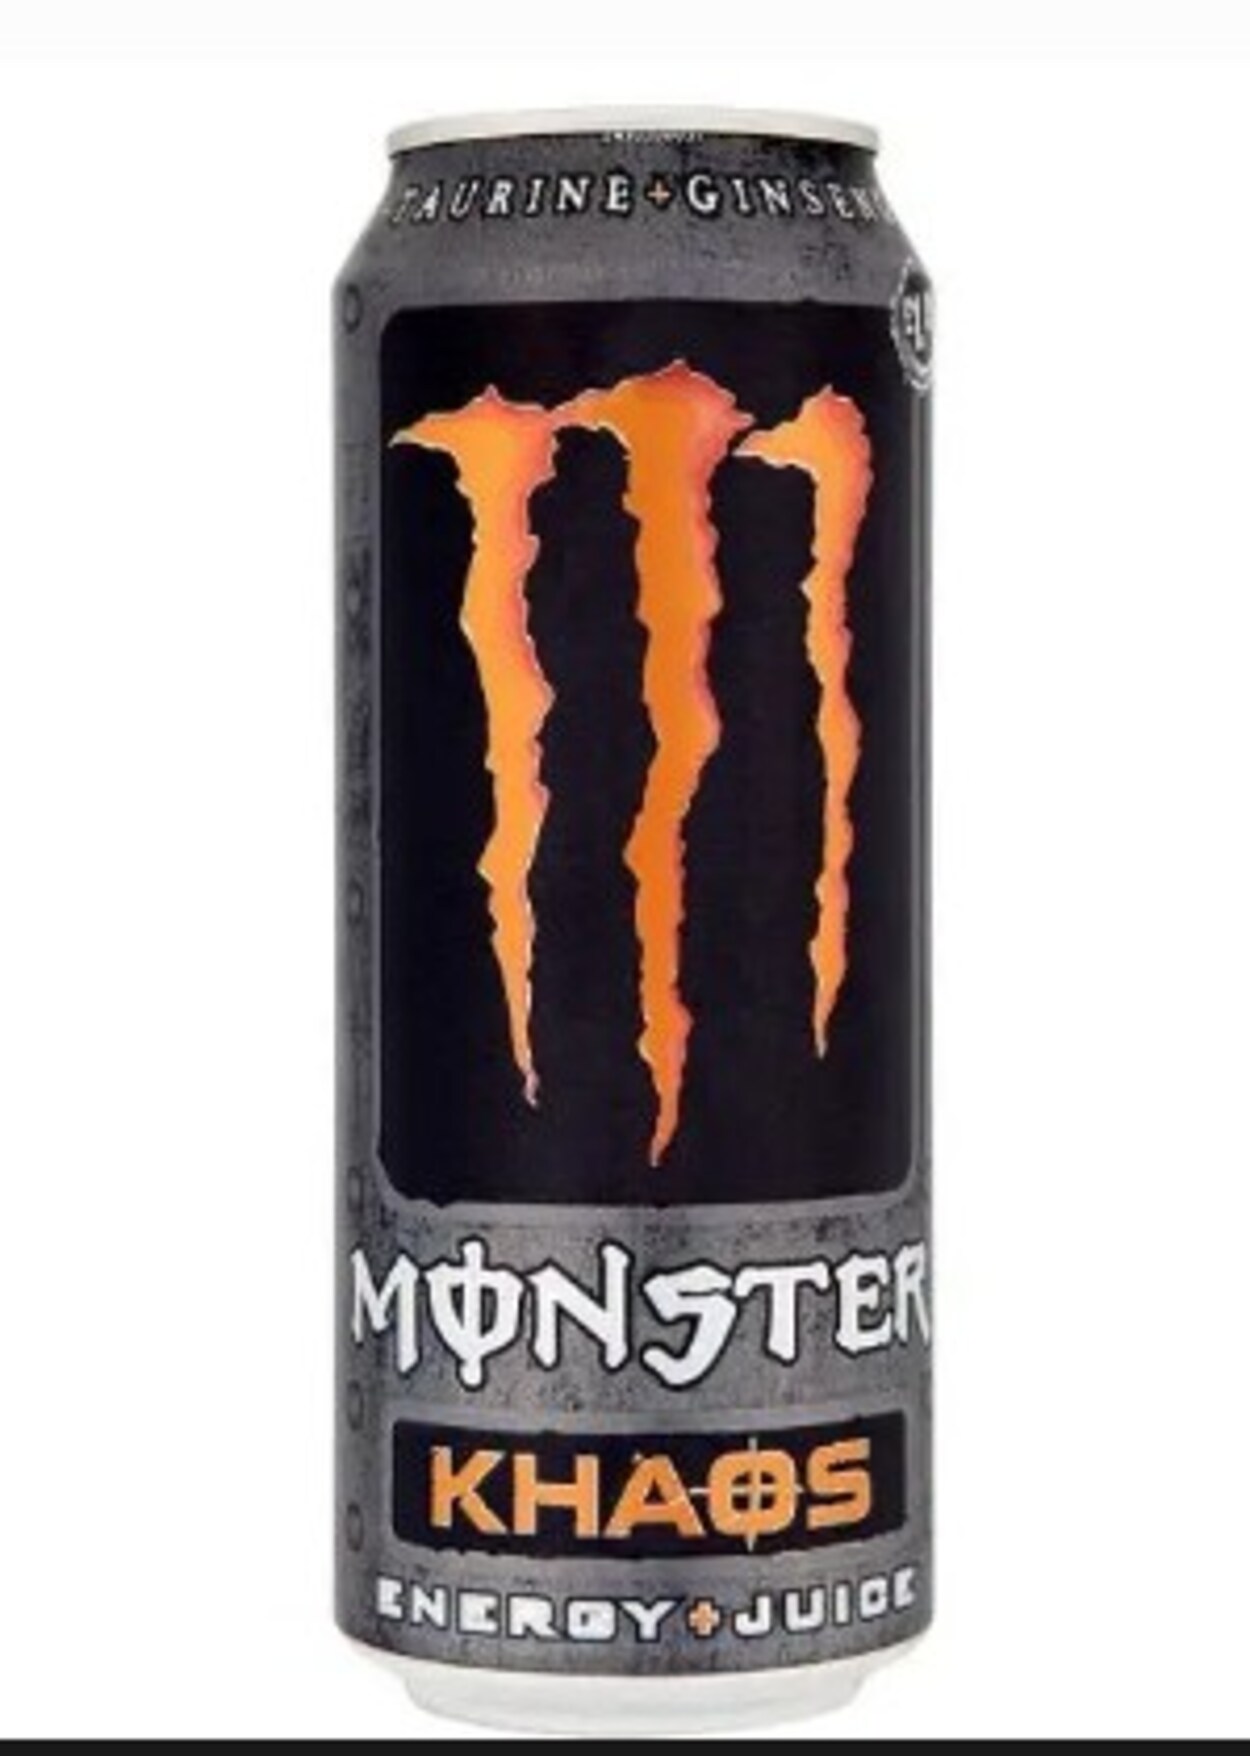 Monster Khaos Energy Drink: Caffeine and Ingredients Revealed